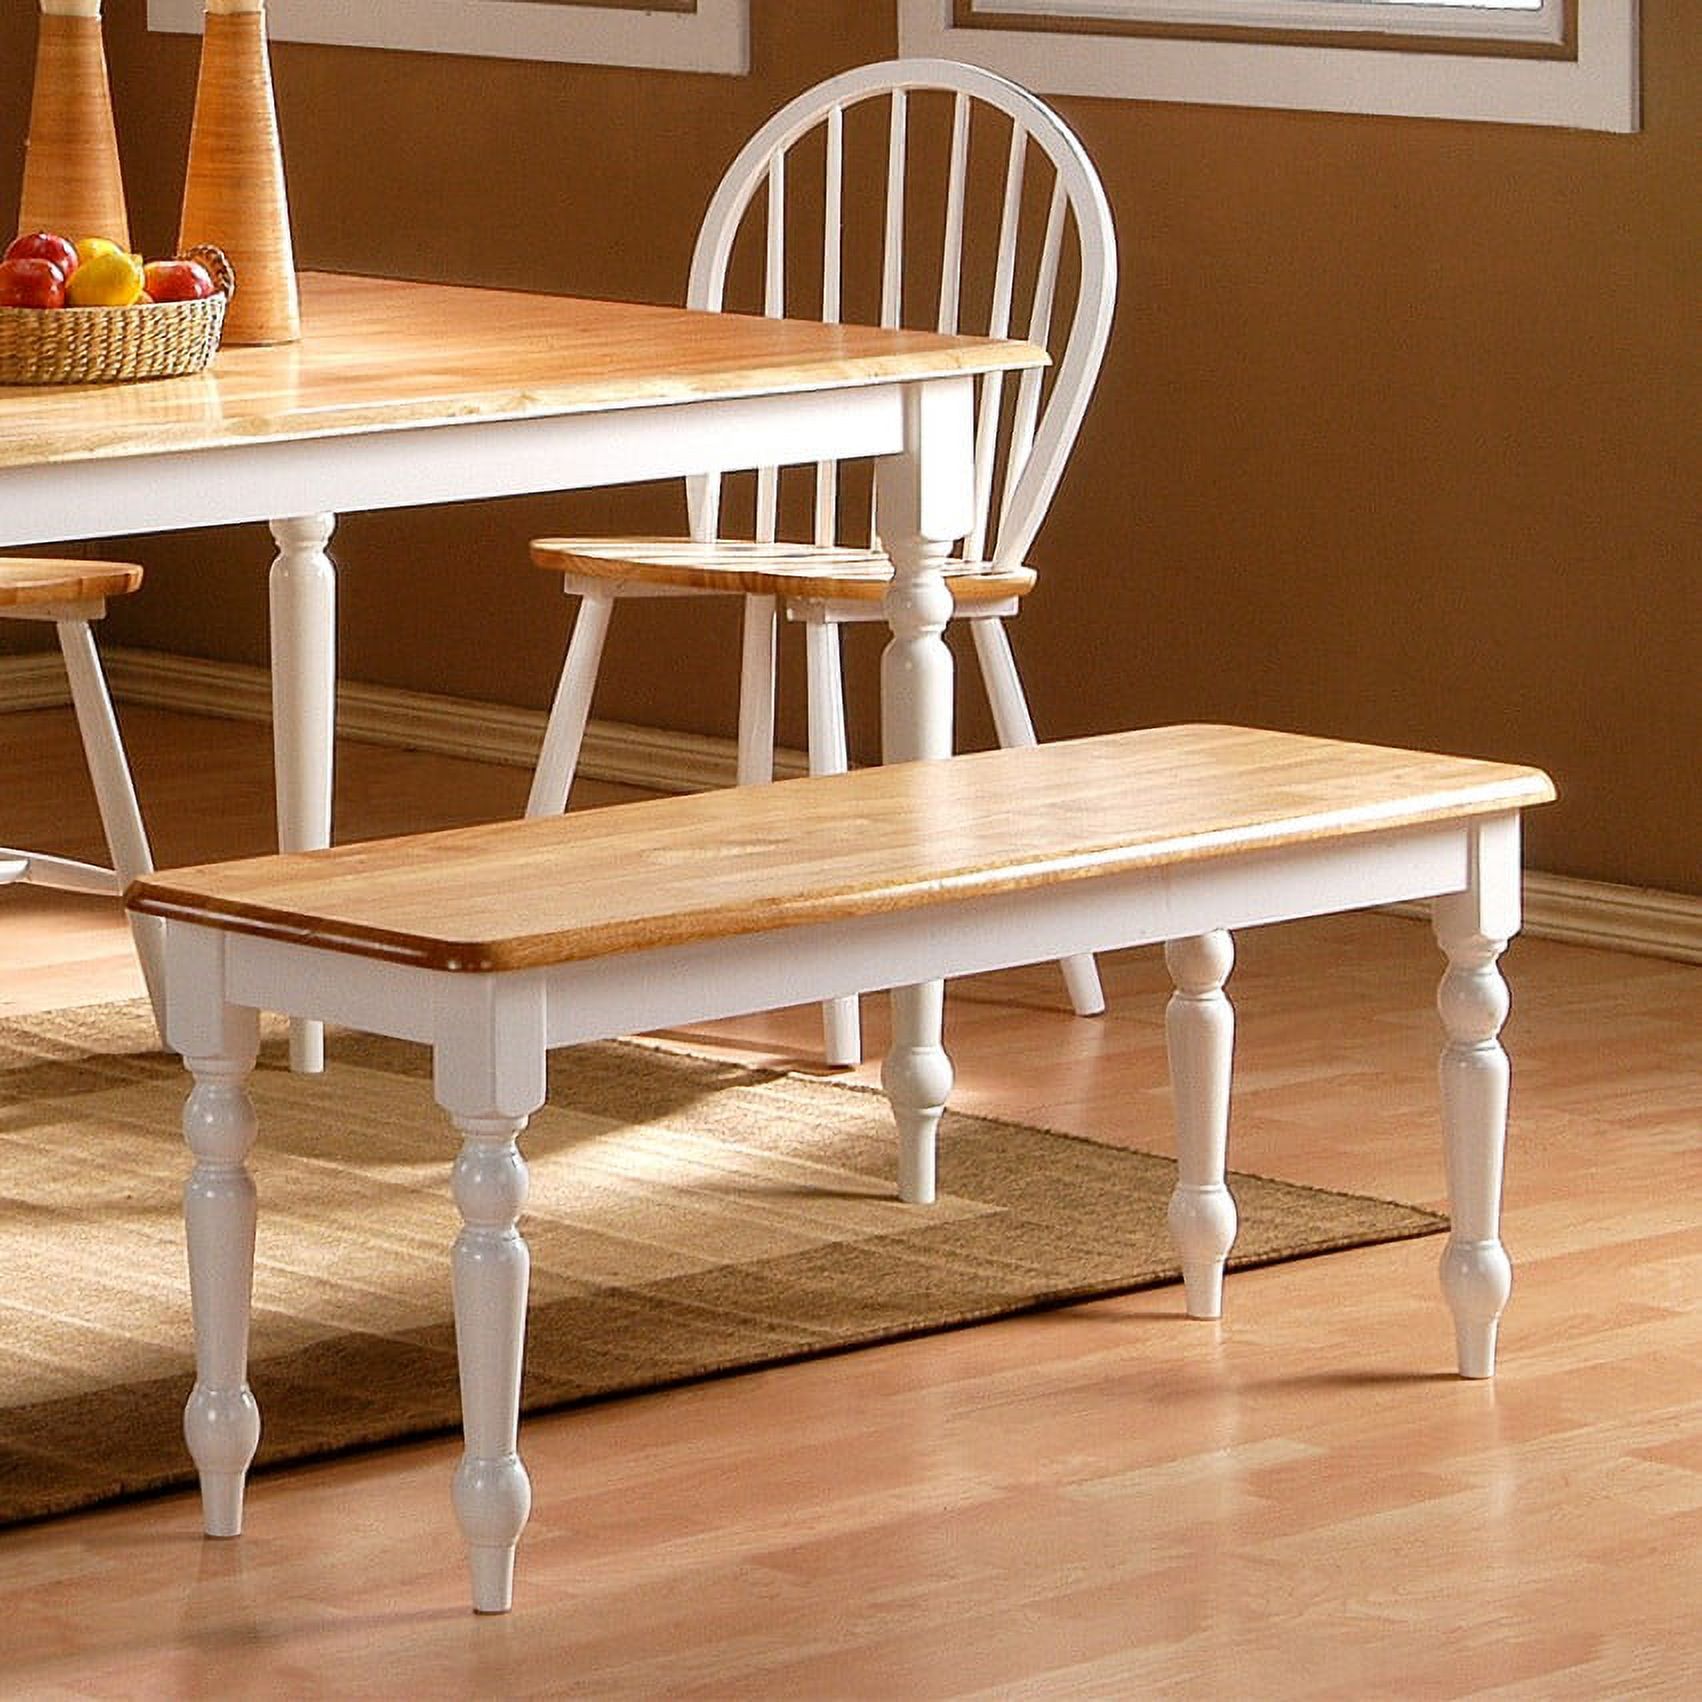 Boraam Farmhouse Backless Wood Bench - White/Natural Two-Tone Finish - image 1 of 5